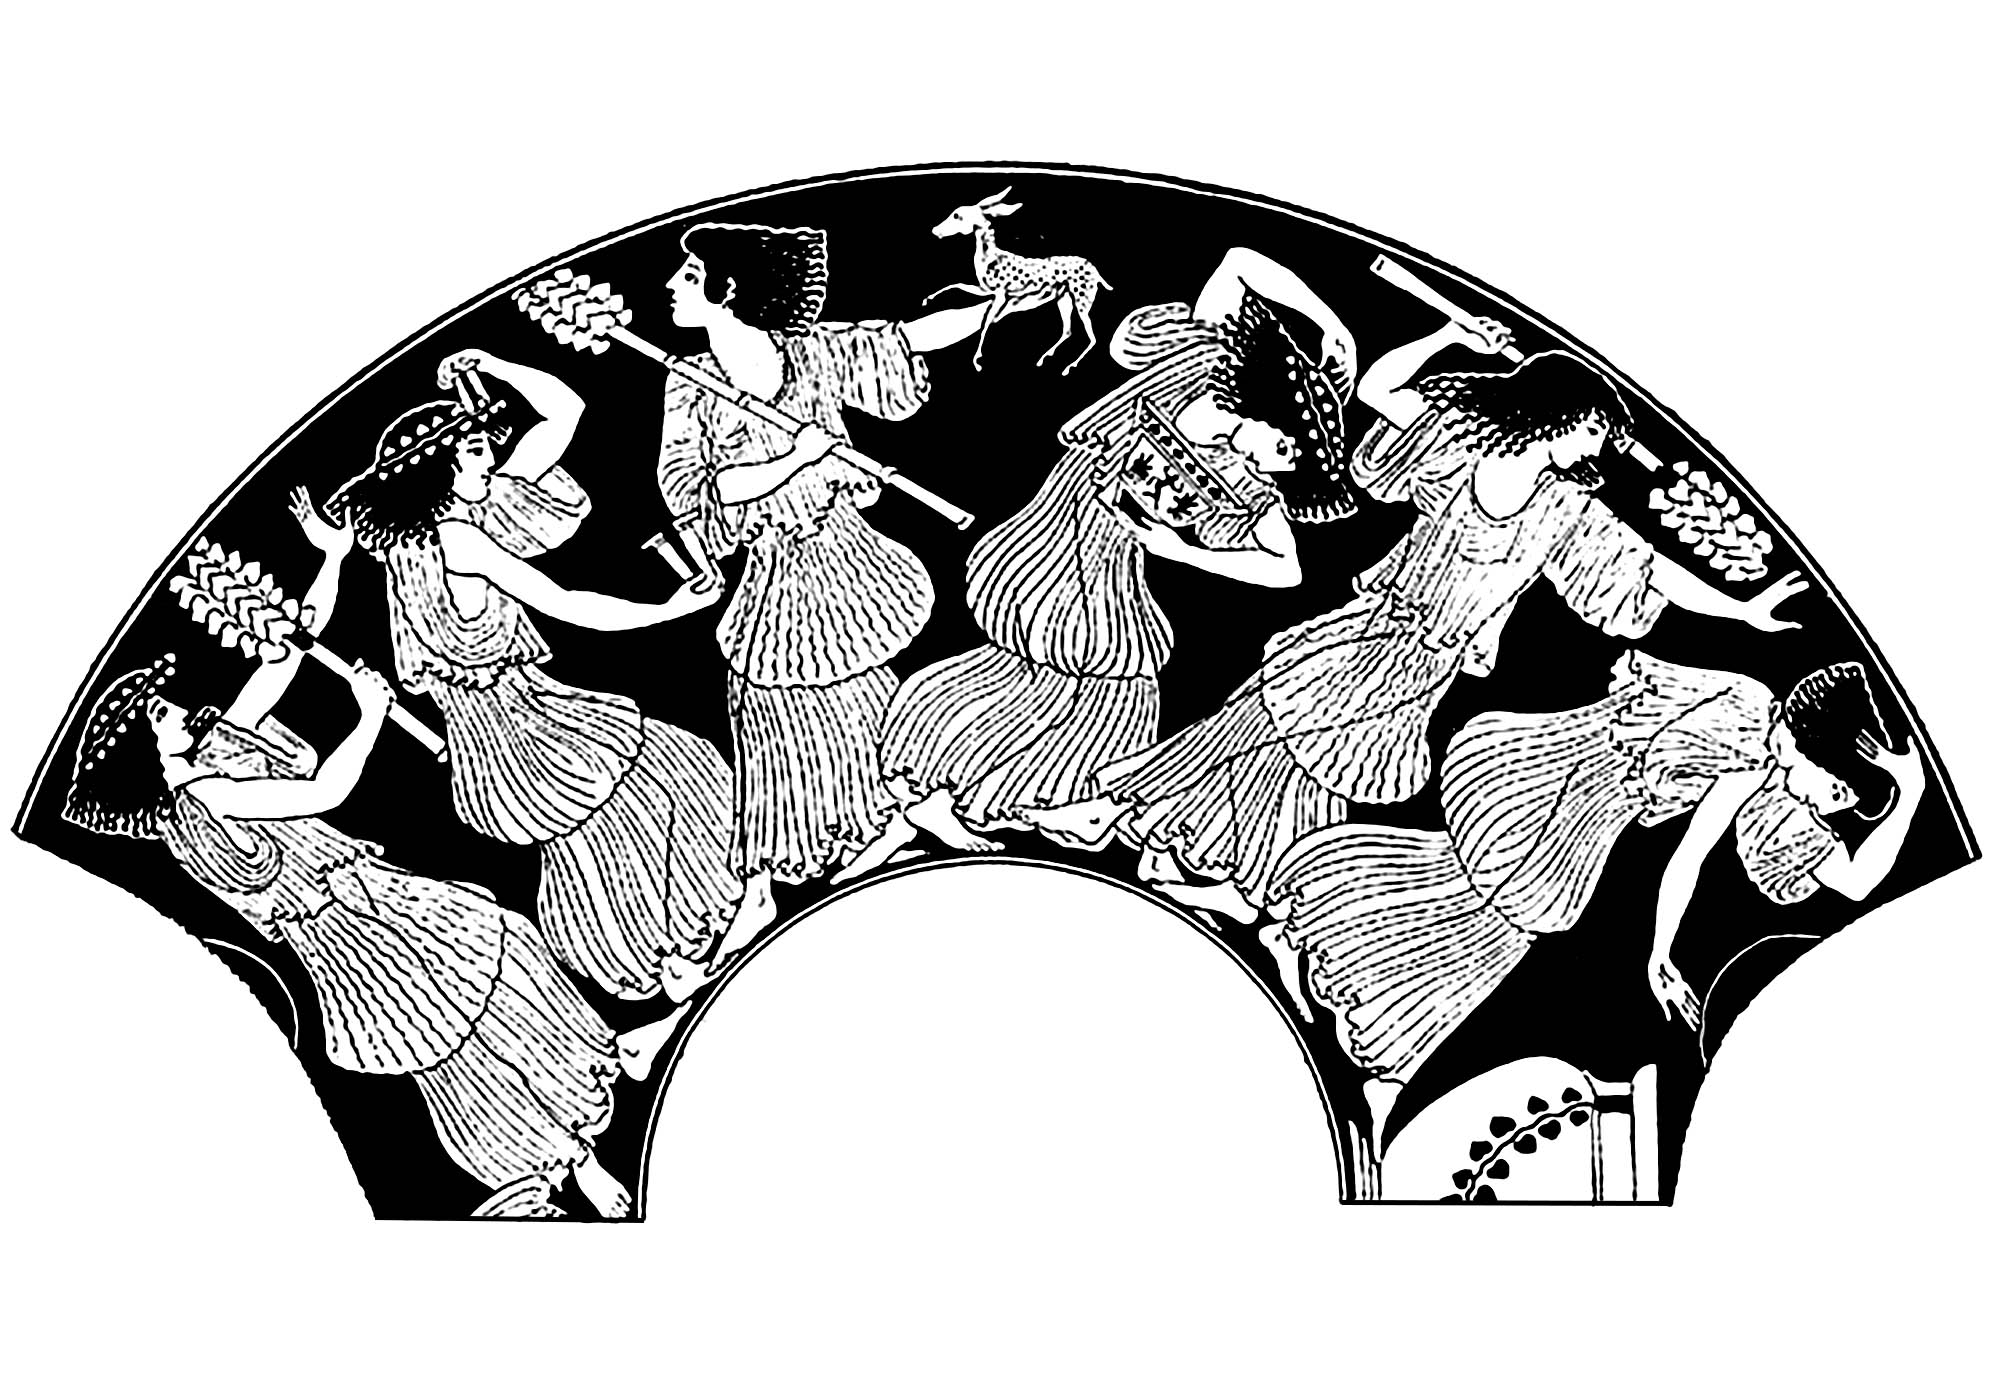 Dionysus and Maenads (created from Ancient Greek Vase Painting)